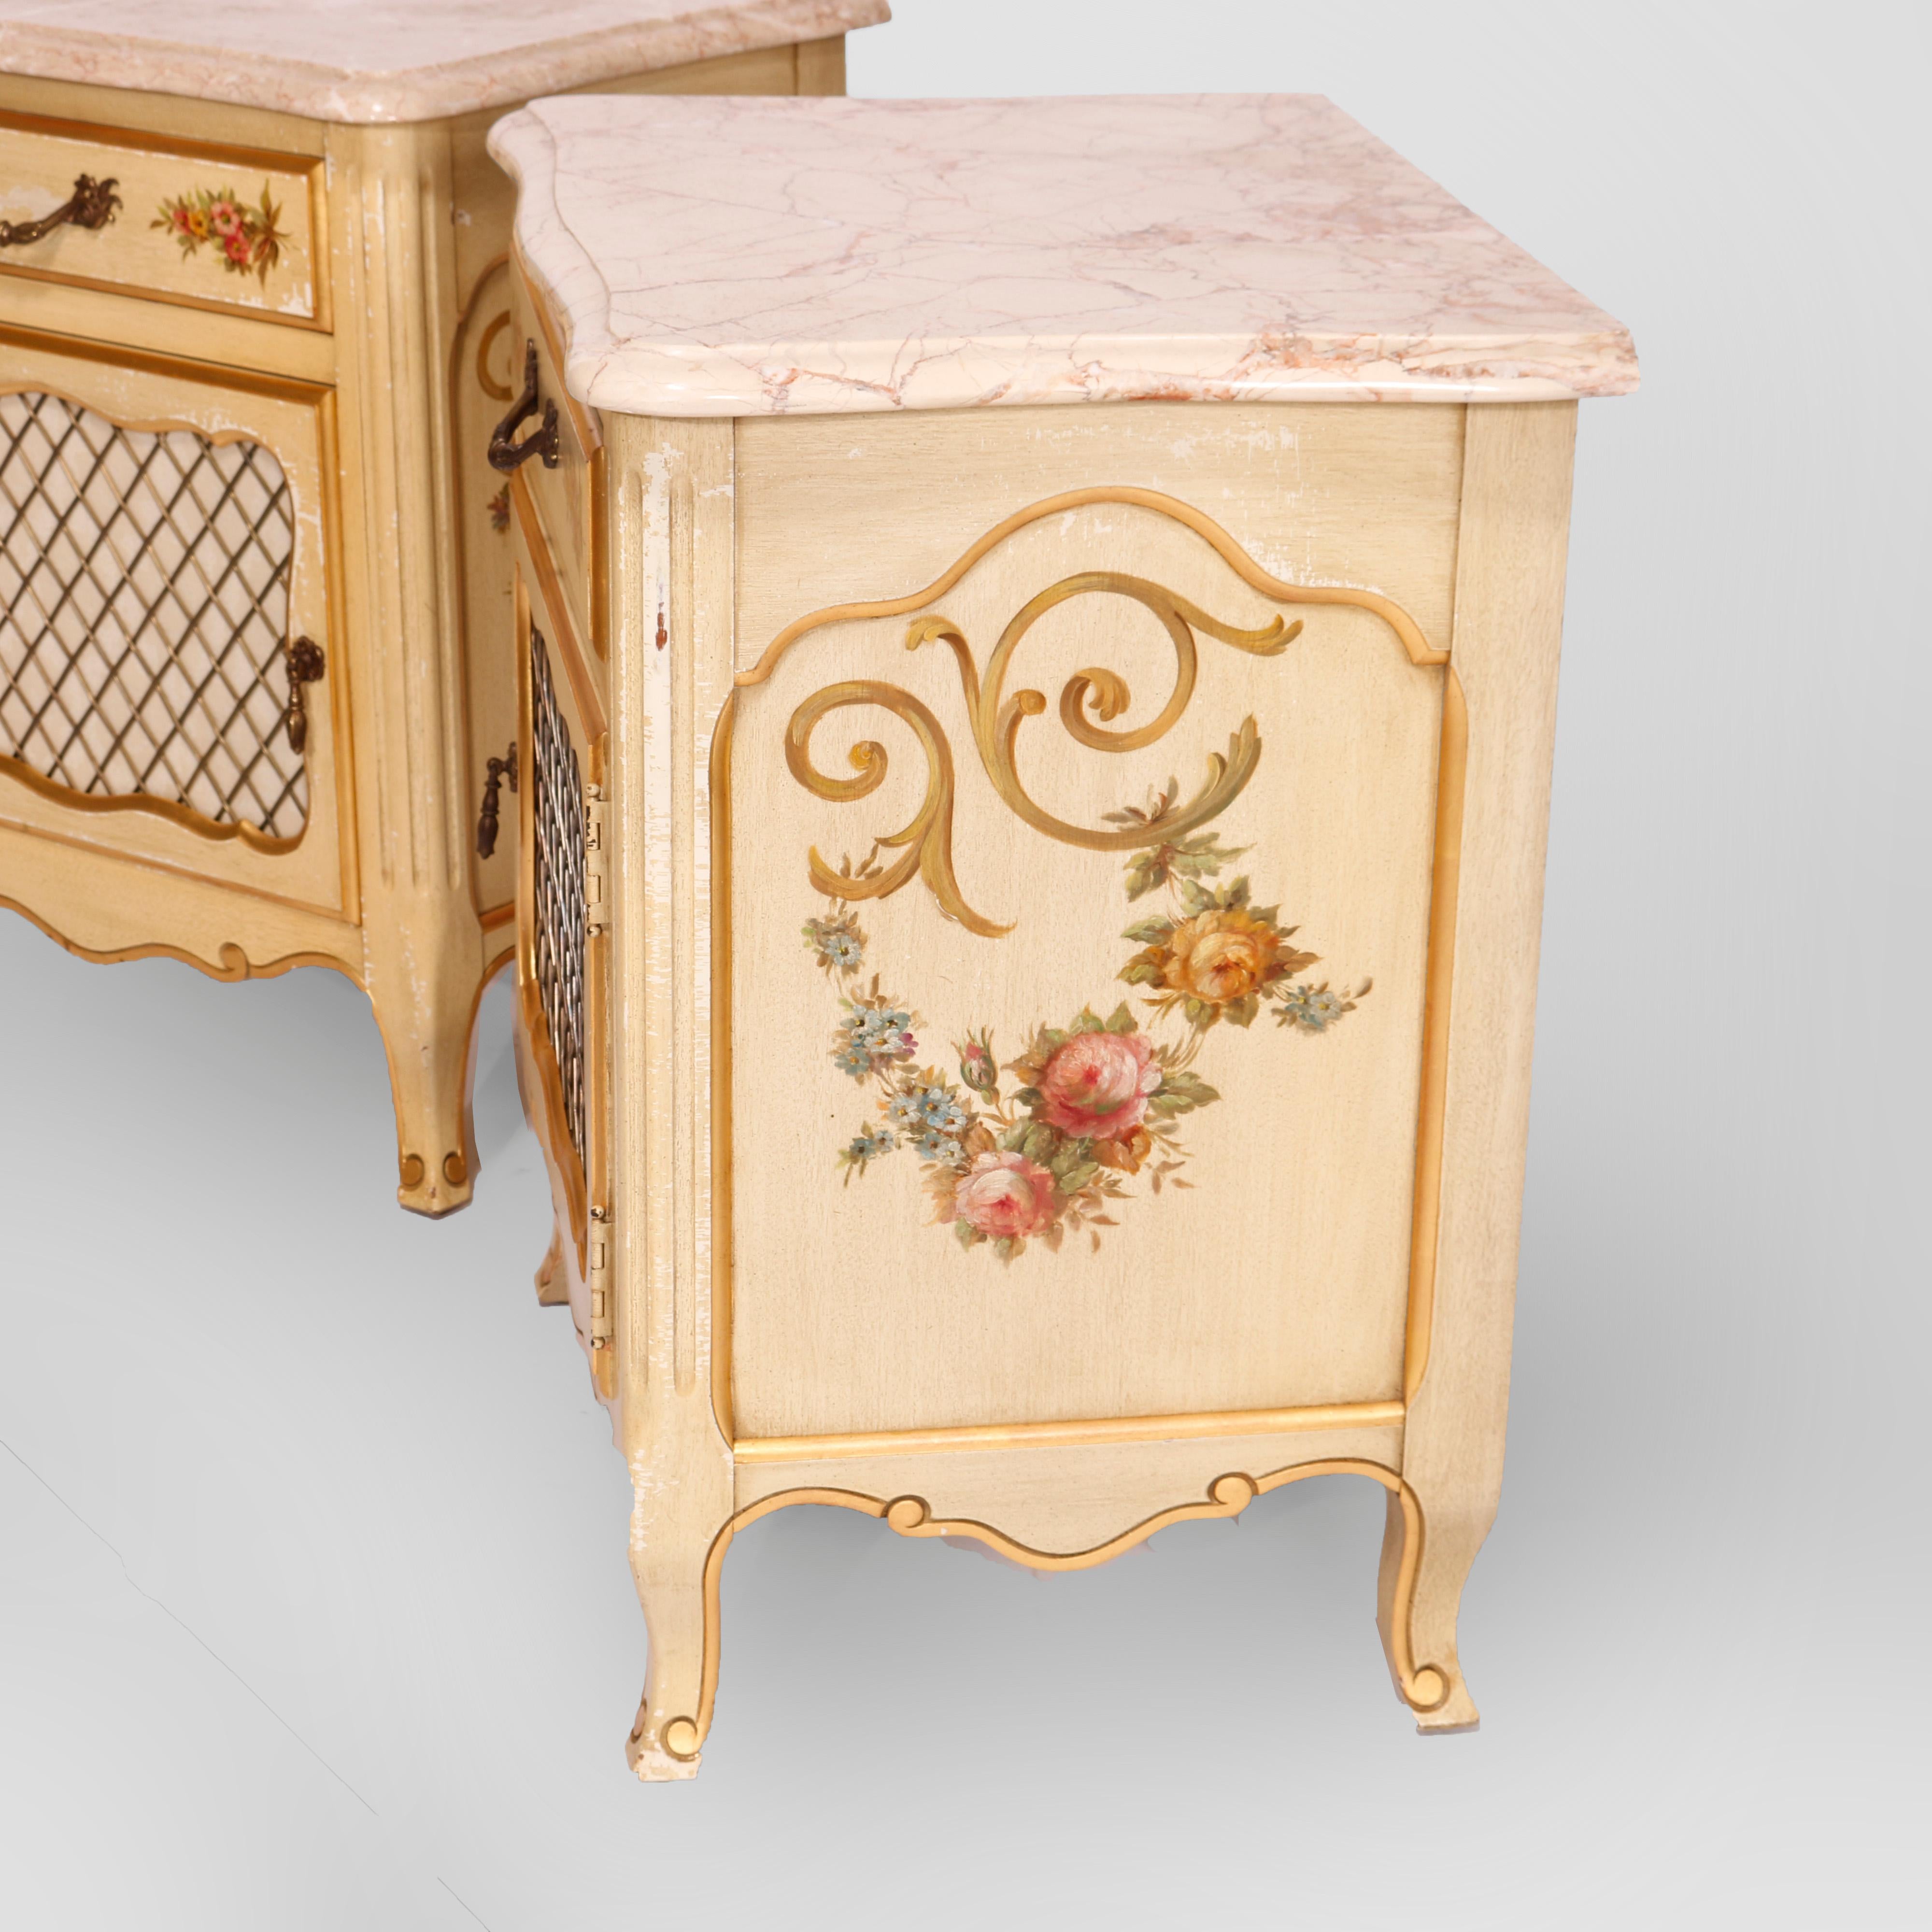 French Provincial Style Polychrome, Gilt & Marble Stands by Kozak Studios 20thC For Sale 6